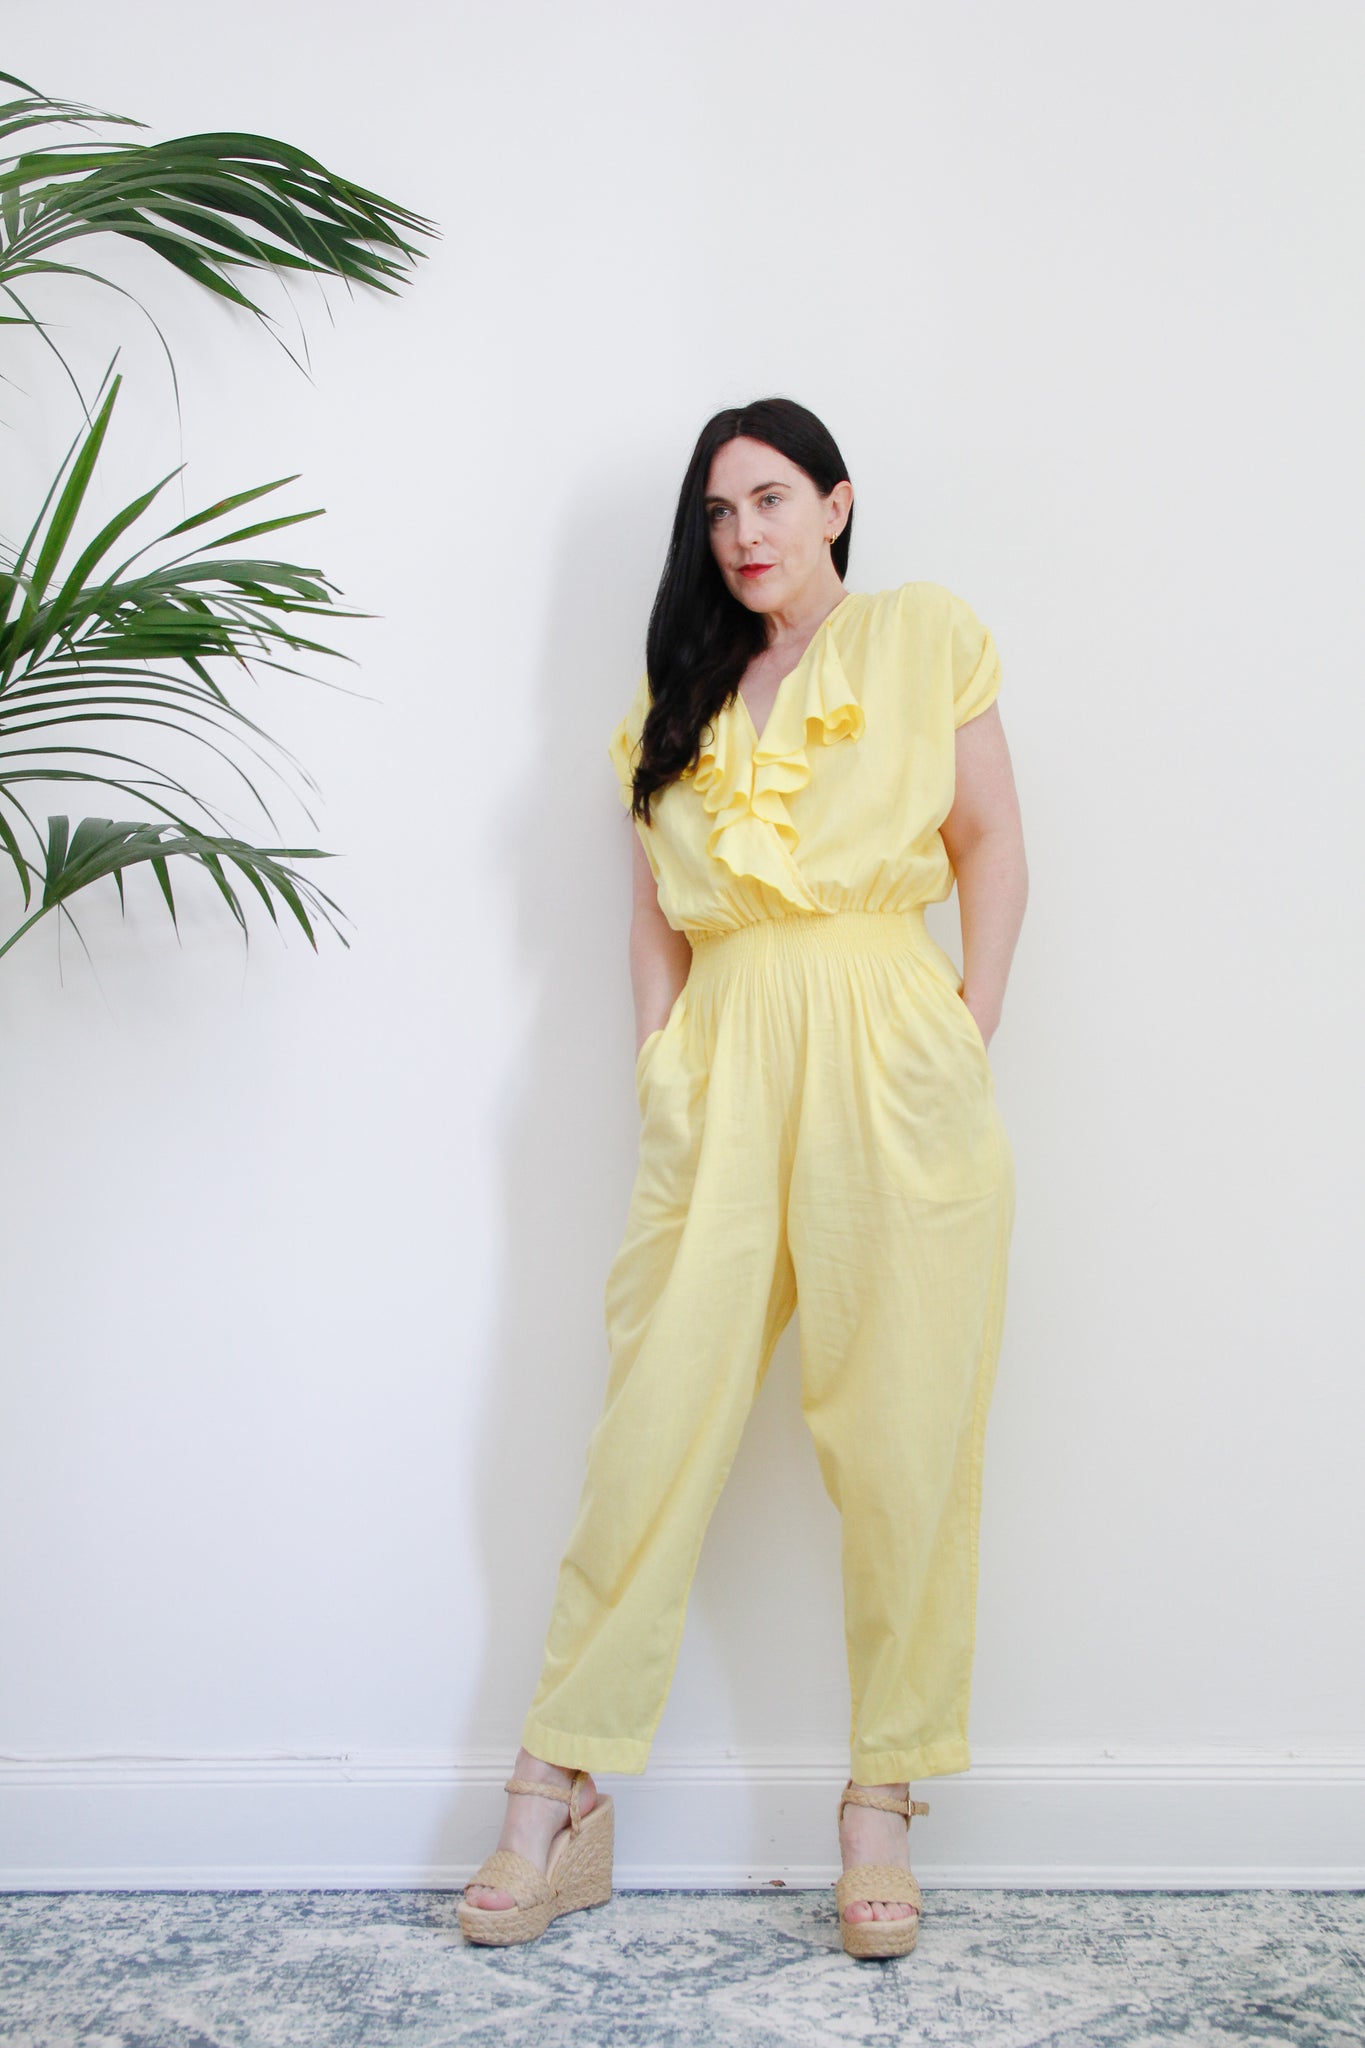 1970's Frilly Cotton Overall Jumpsuit